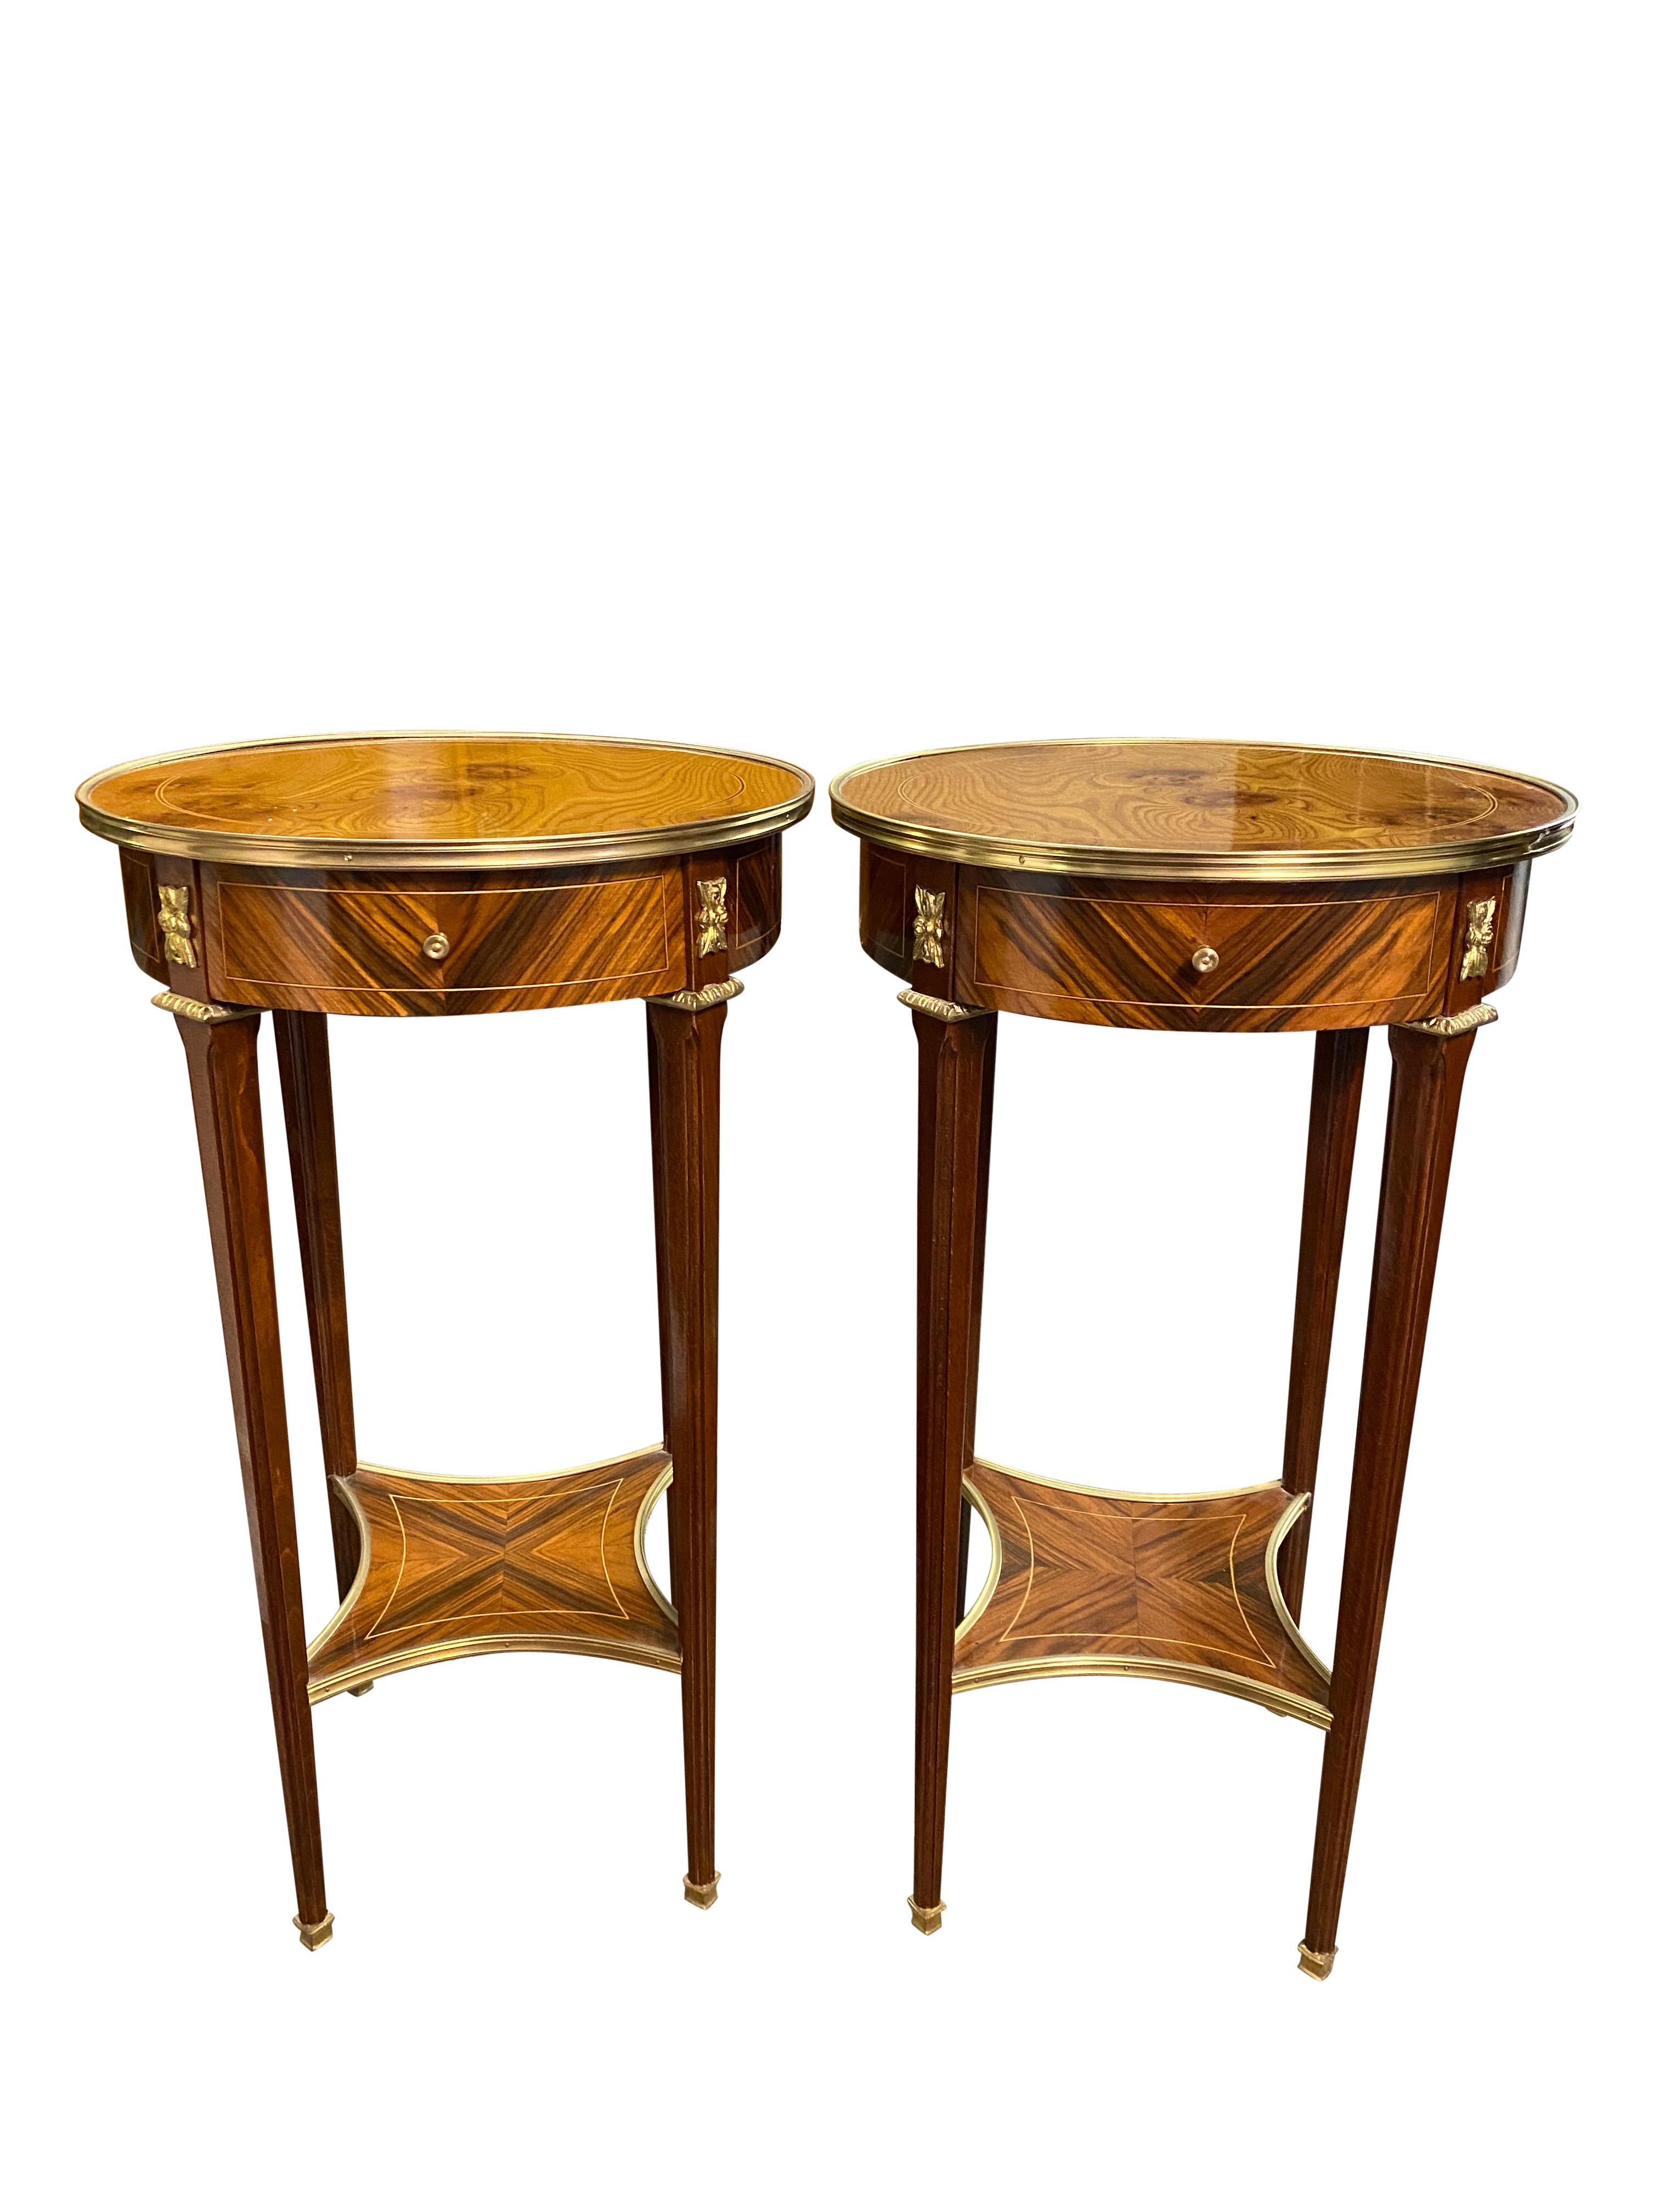 European Pair of 20th Century English Regency Style Side Tables For Sale